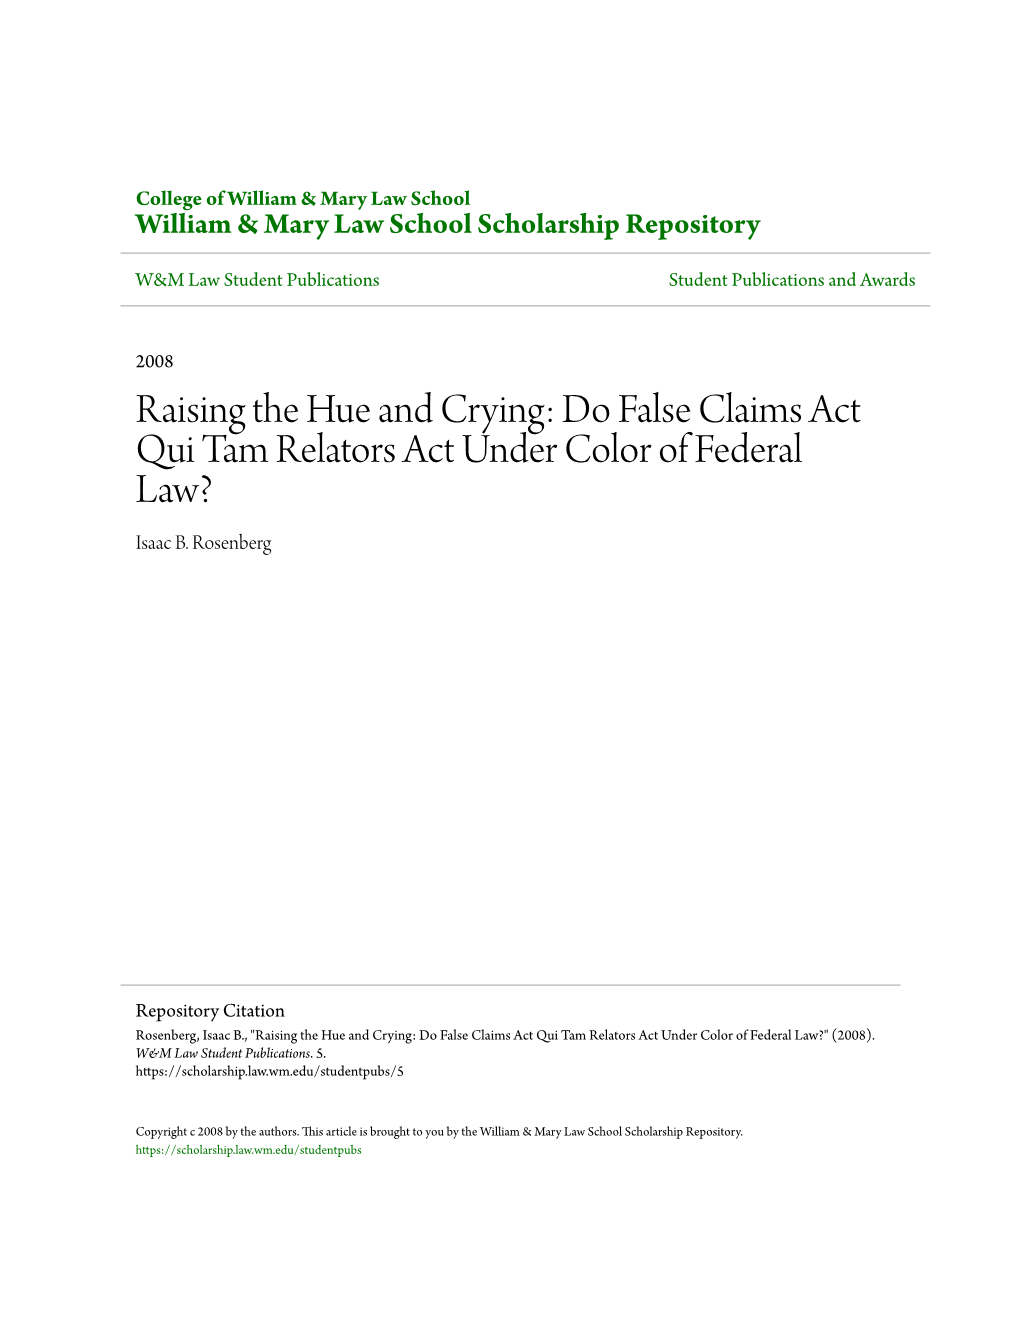 Do False Claims Act Qui Tam Relators Act Under Color of Federal Law? Isaac B